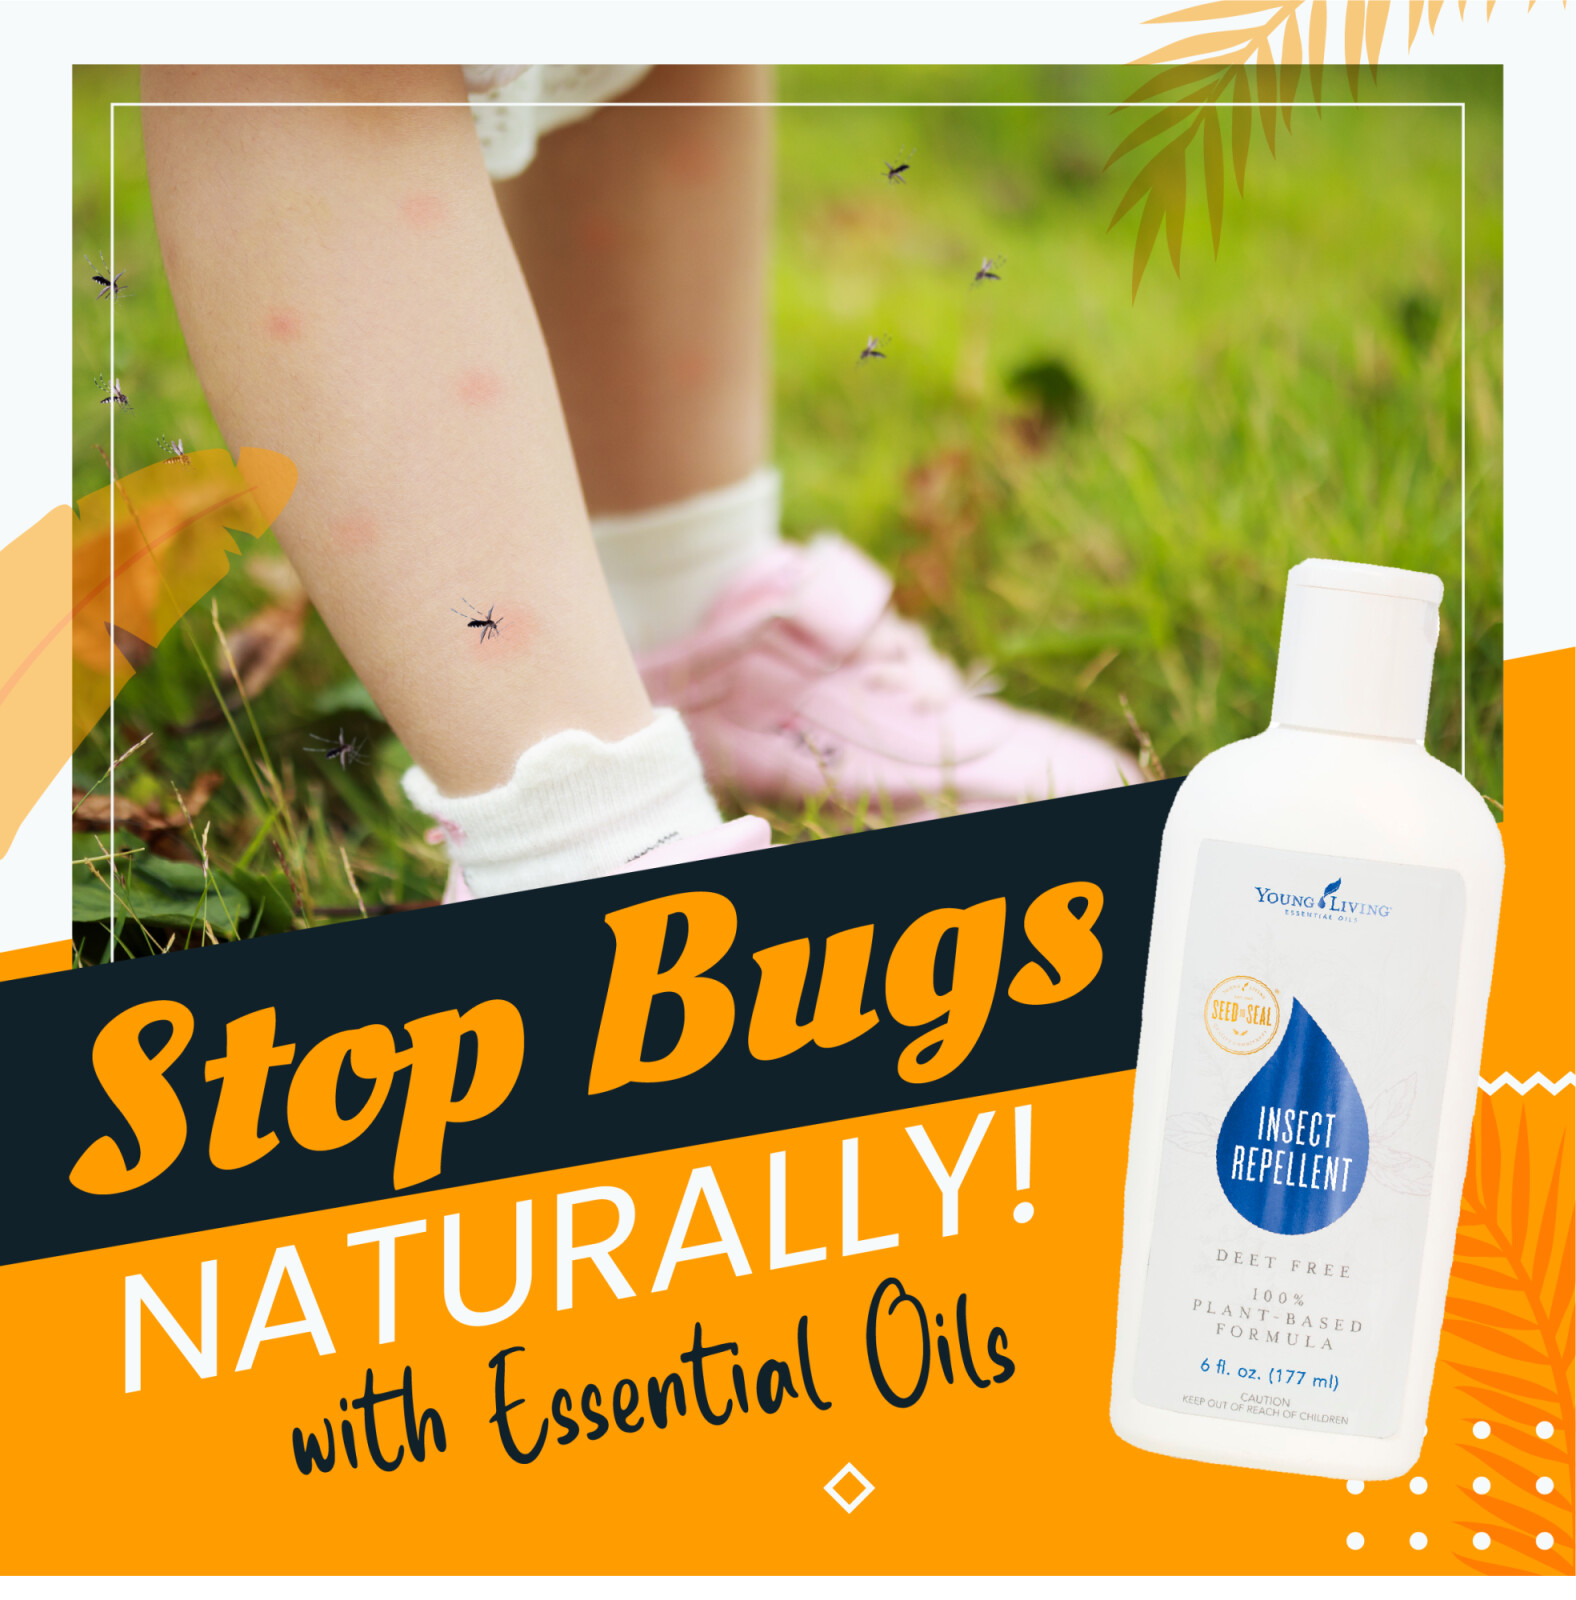 All-Natural Essential Oil Insect Repellent That Works!